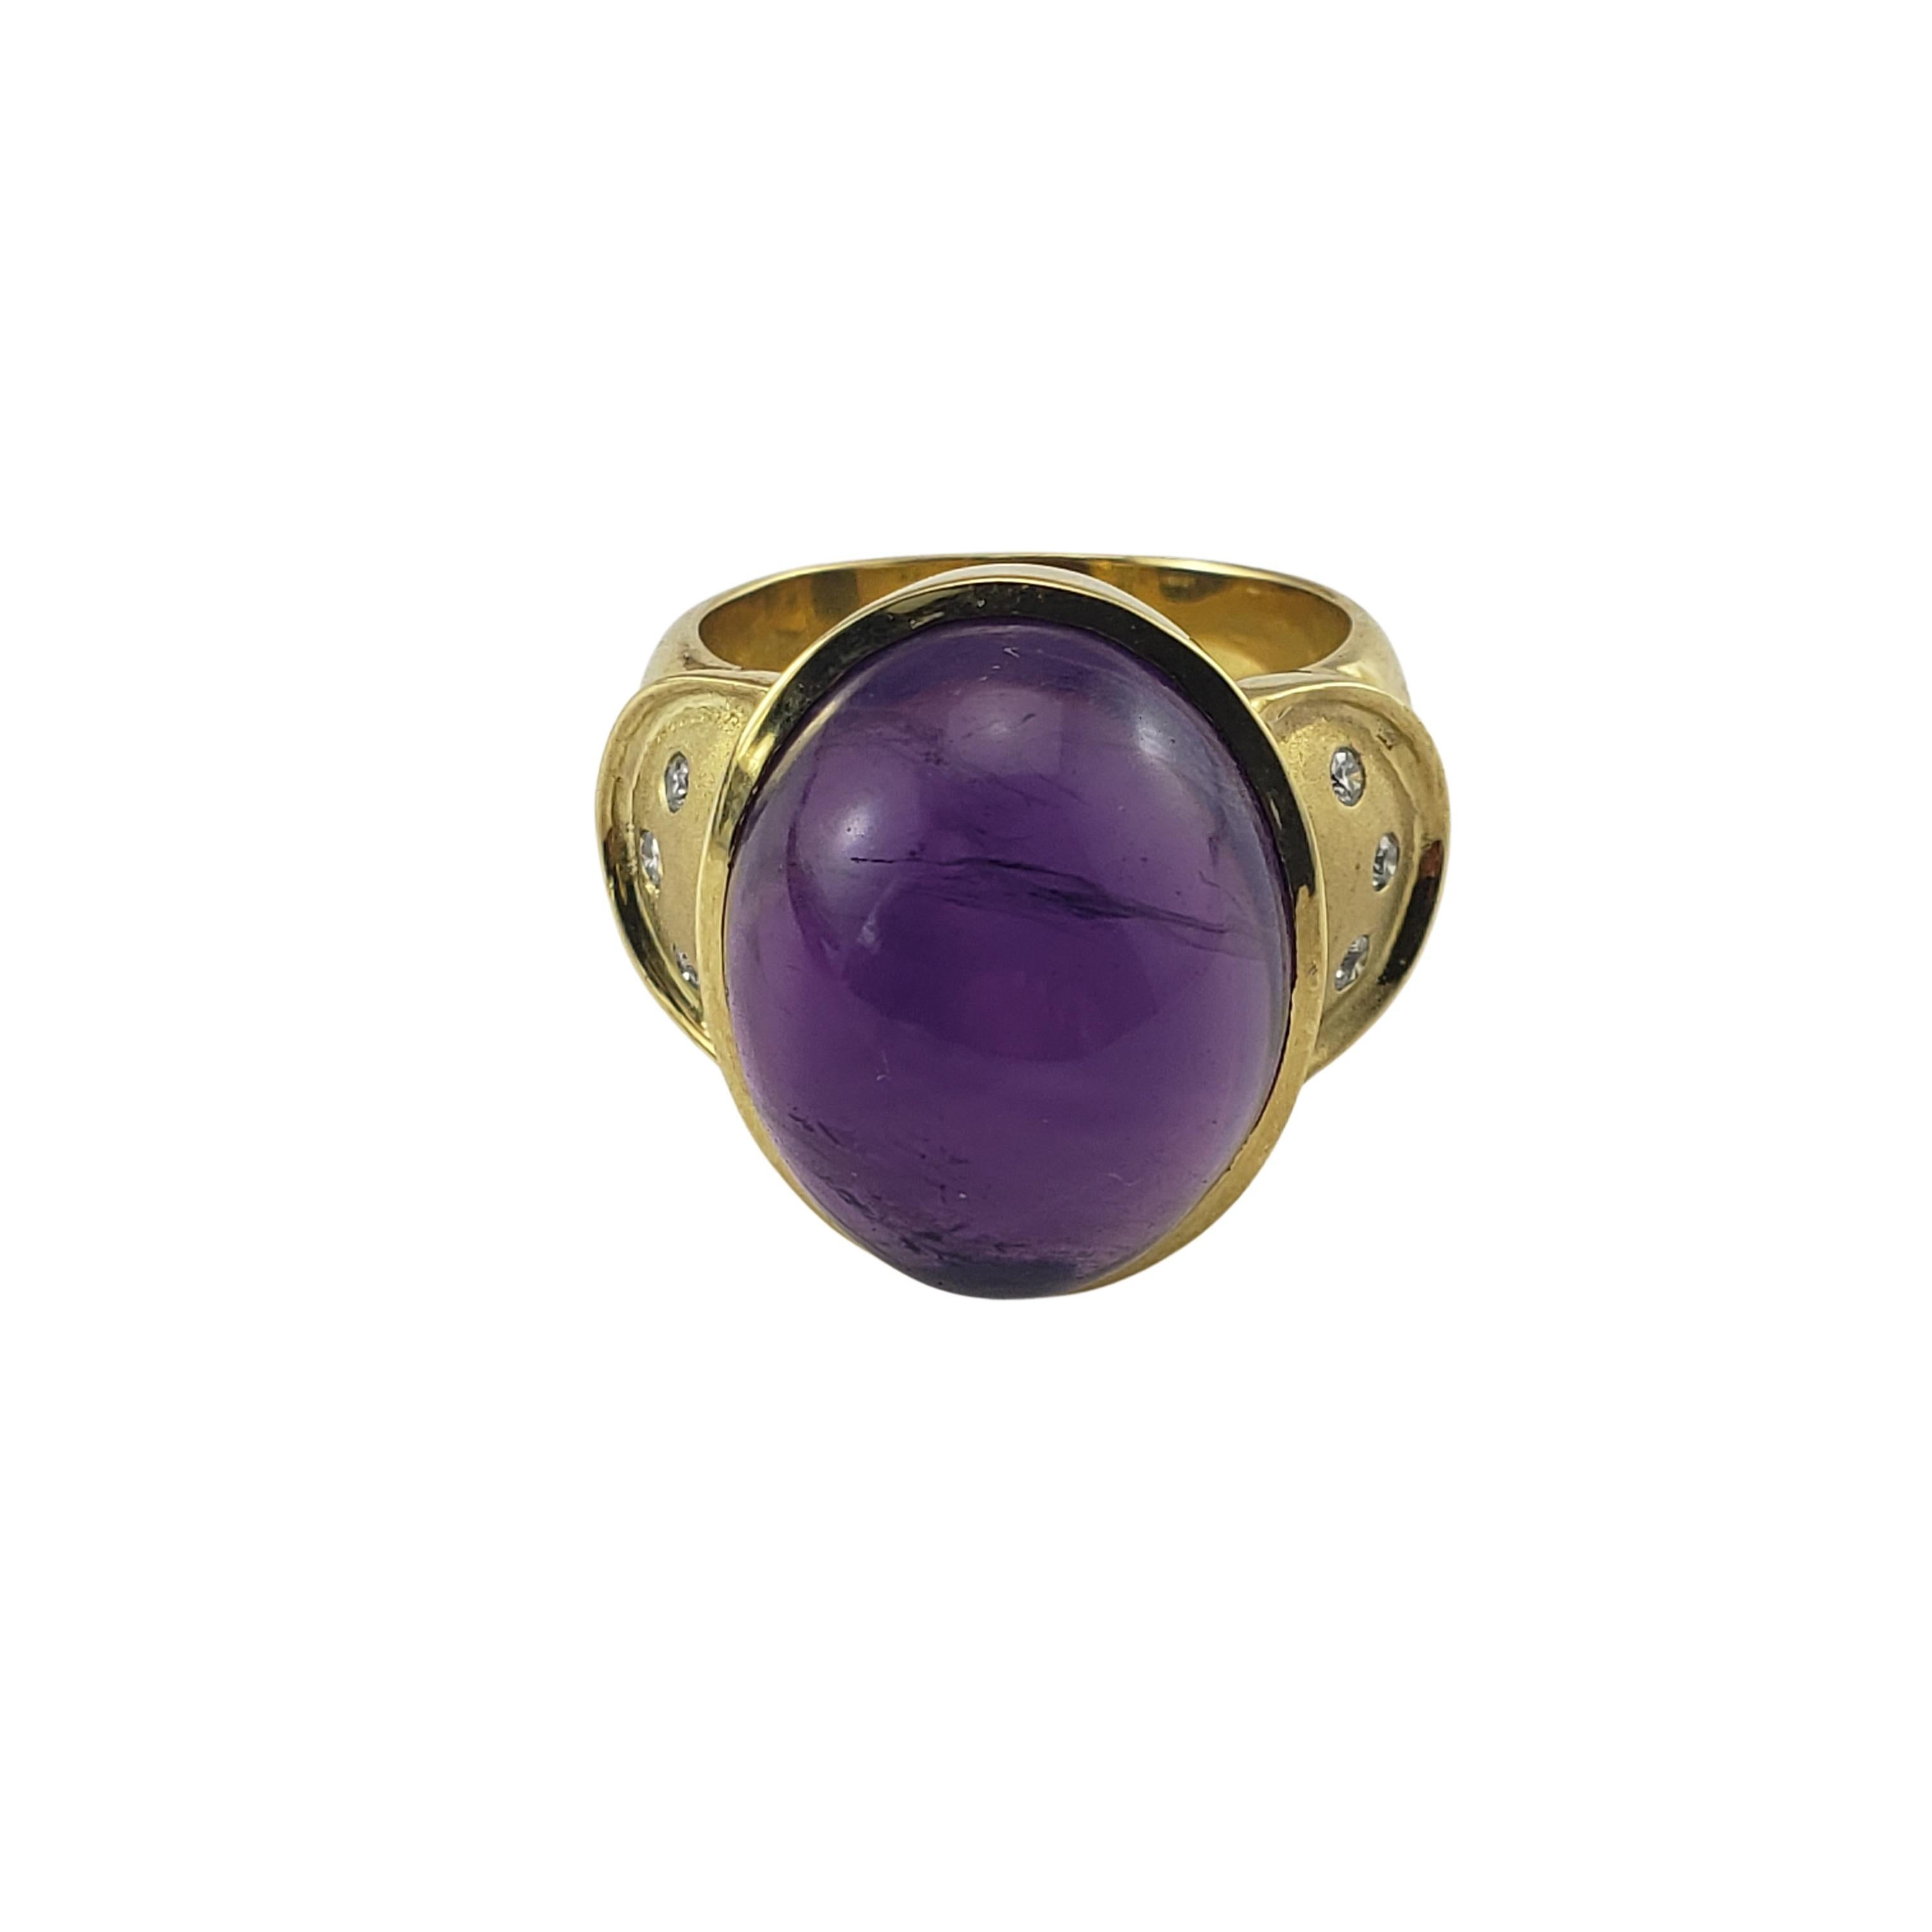 18 Karat Yellow Gold and Cabochon Amethyst and Diamond Ring Size 8 GAI Certified-

This stunning ring features one oval cabochon amethyst (19 mm x 15 mm) and six round brilliant cut diamonds set in classic 18K yellow gold.  Shank: 7 mm.

Total